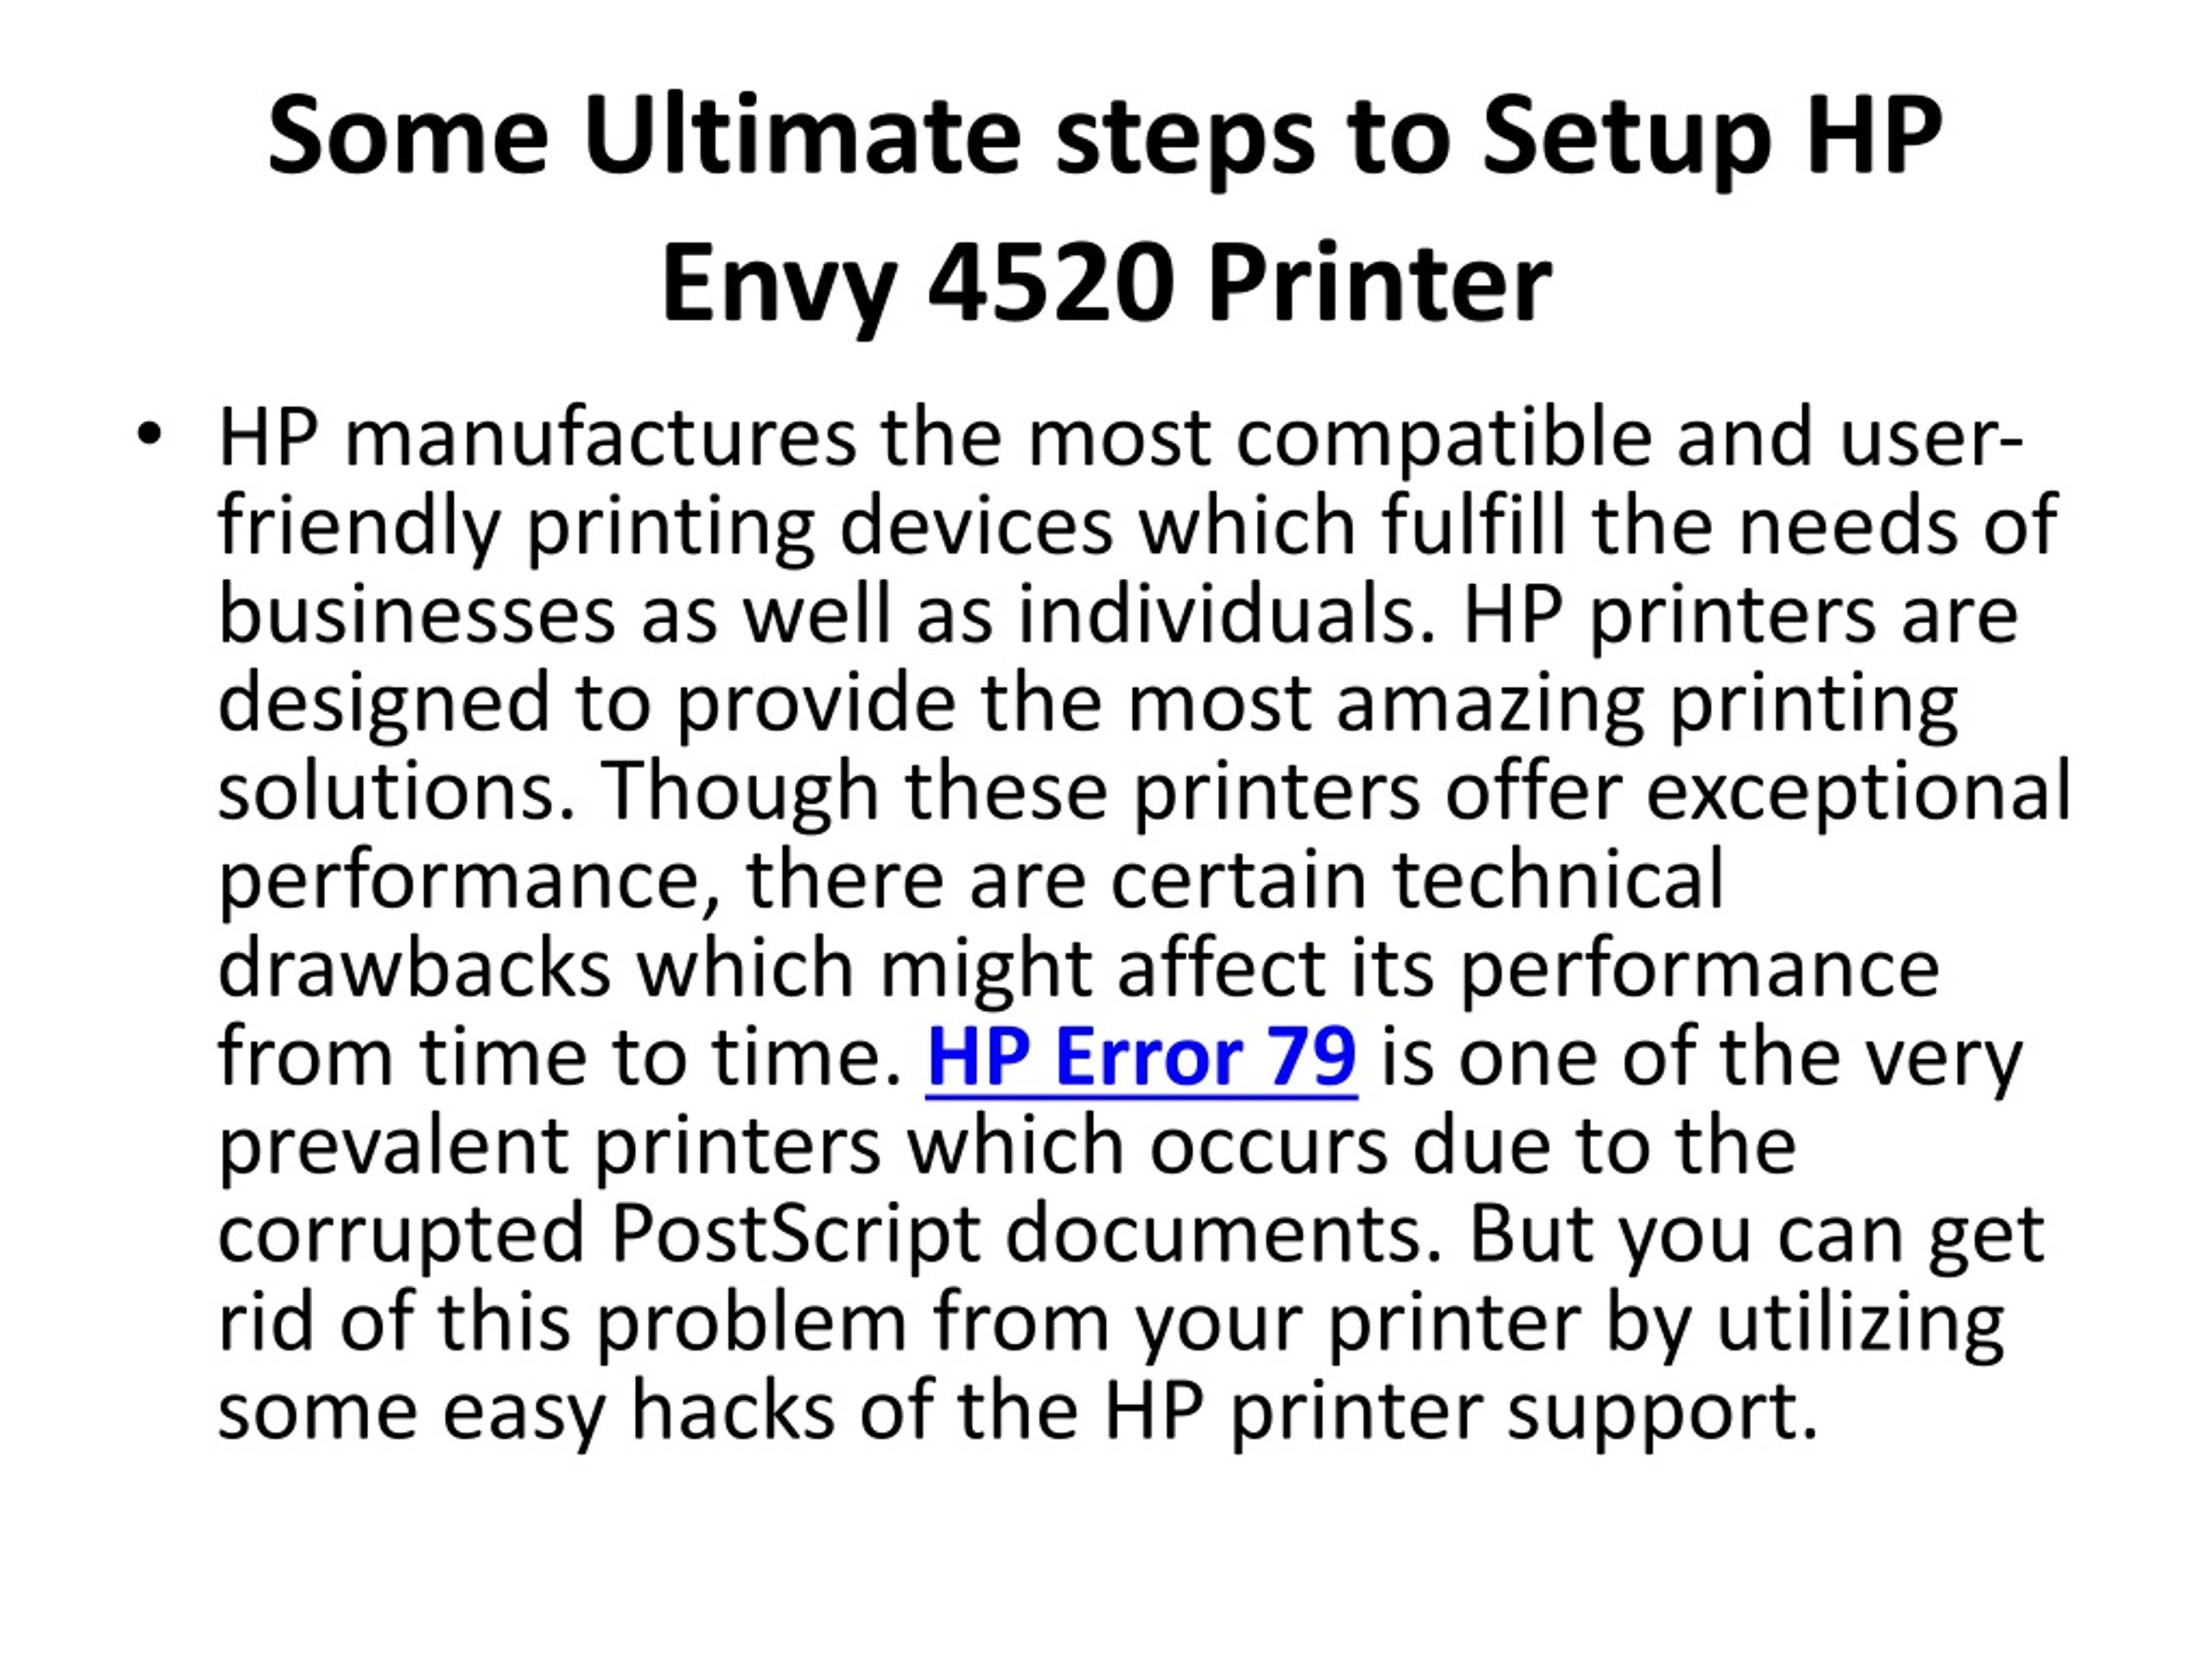 Ppt Some Ultimate Steps To Setup Hp Envy 4520 Printer Powerpoint Presentation Id8412107 9775